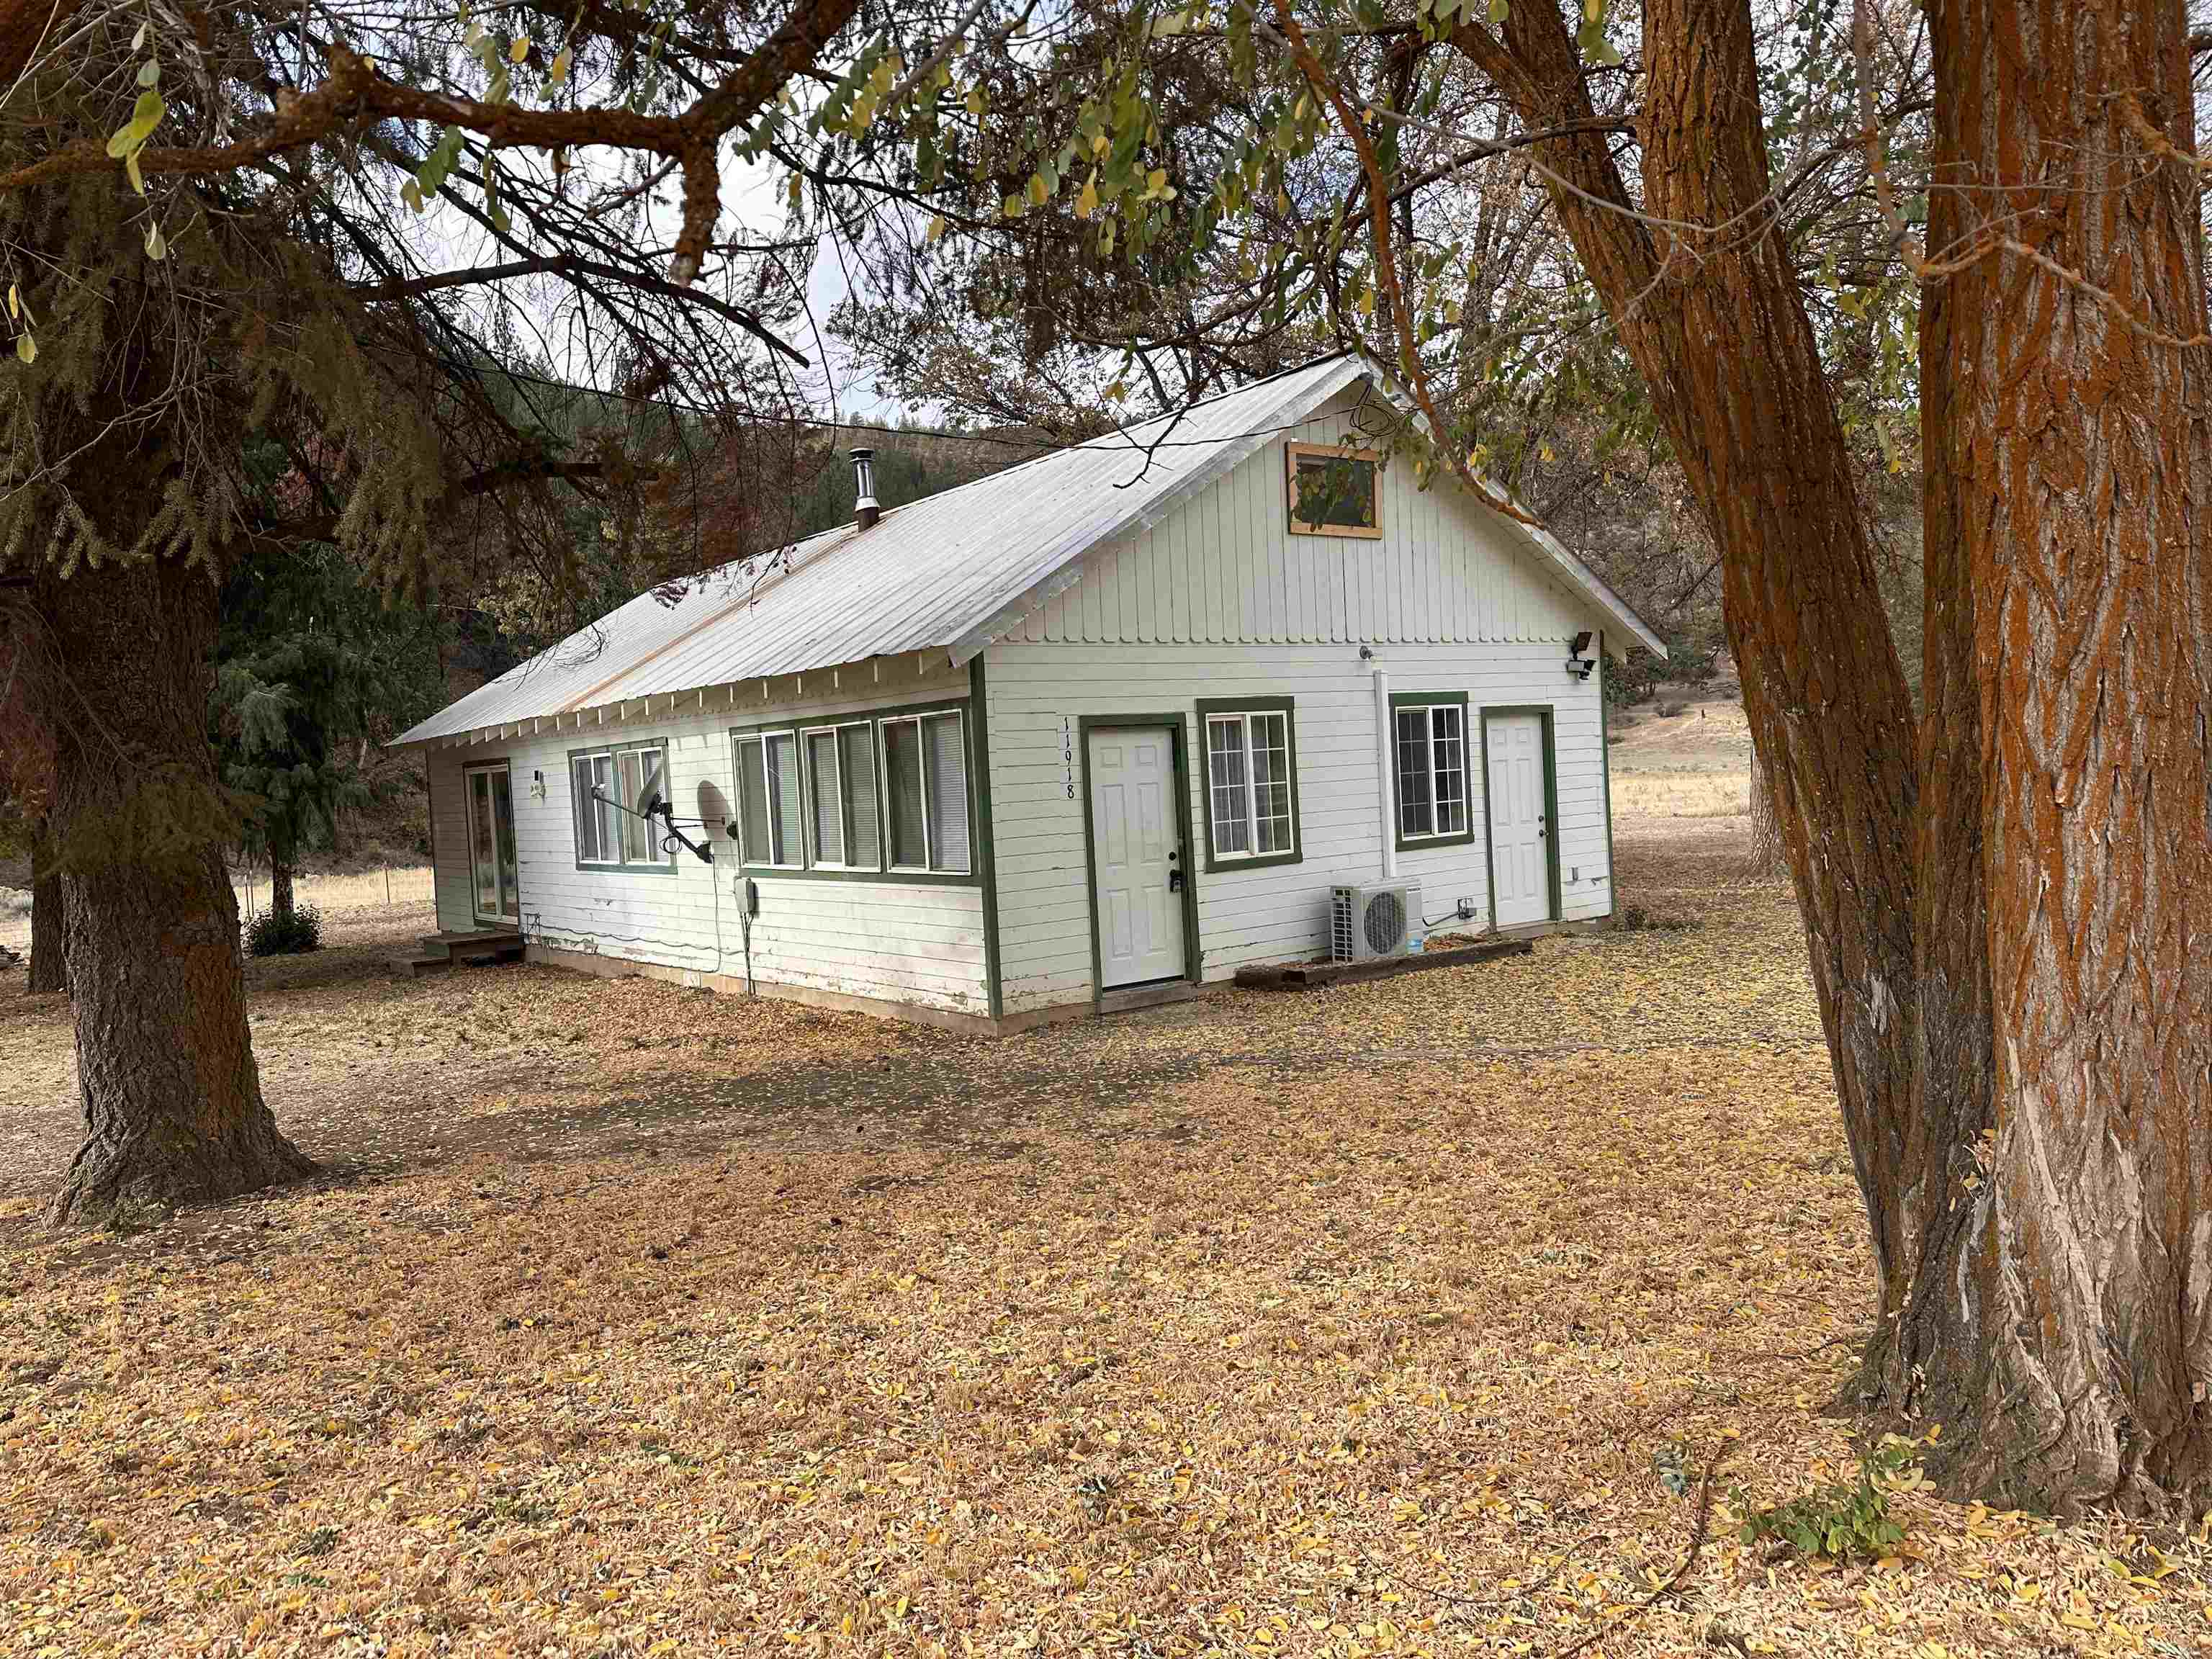 80 Acres in the Moffit Creek drainage Fort Jones CA Large pastures with an old mill barn, quaint 3-bedroom 1 bath farmhouse, mini split with a wood stove, Mud room, newer Vinyl windows, metal roof, most of the ground is pastures, seasonal creeks and a shared well